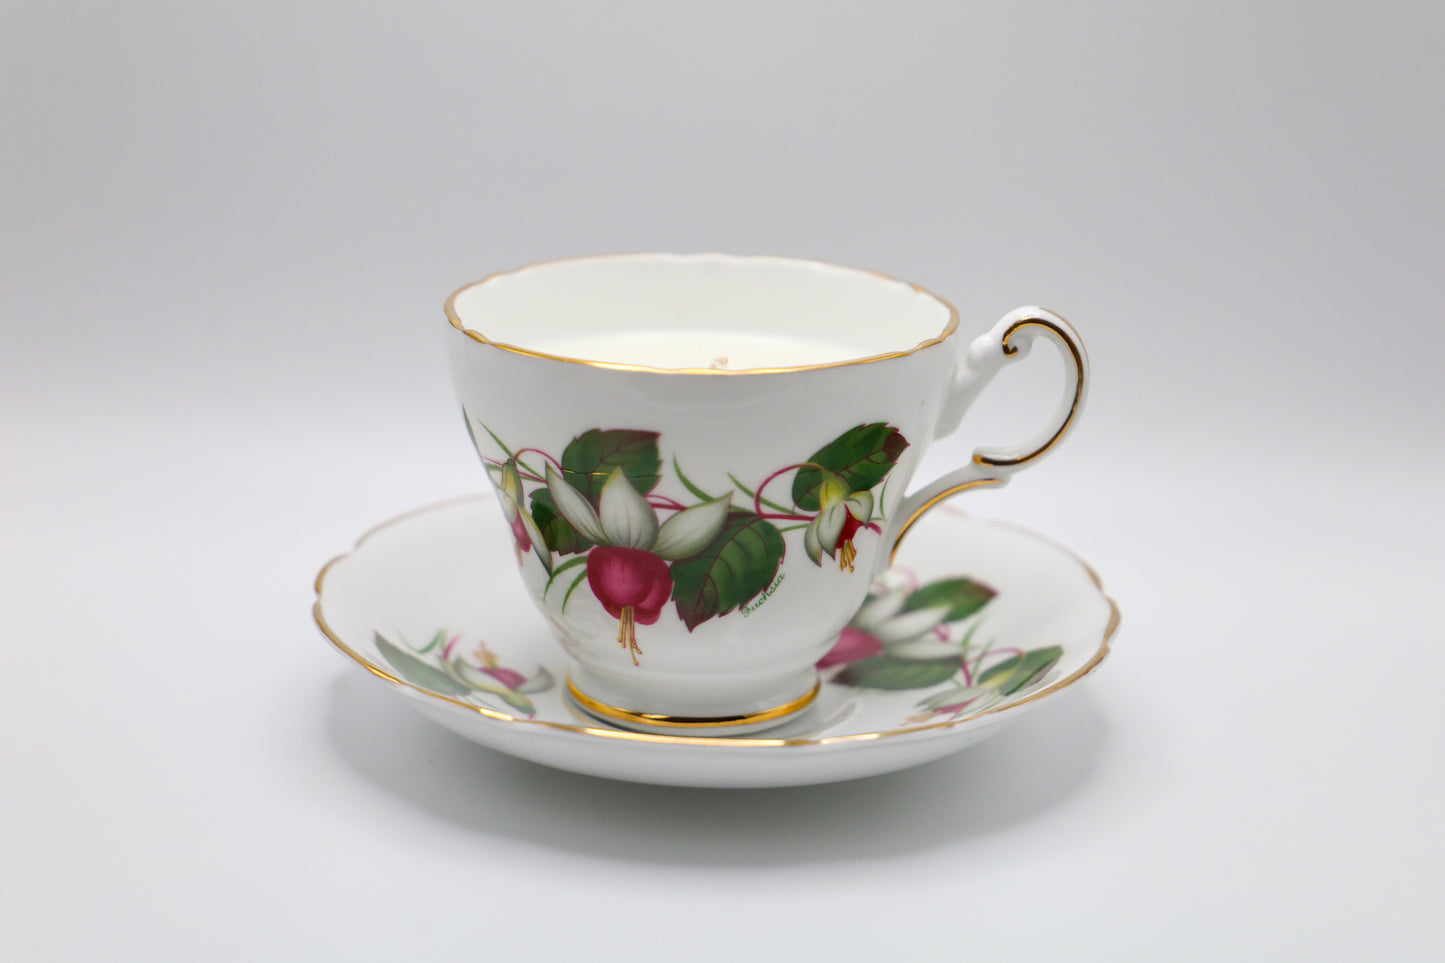 English Bone China Tea cup and saucer with fuchsia motif, filled with lush succulent scented soy candle.